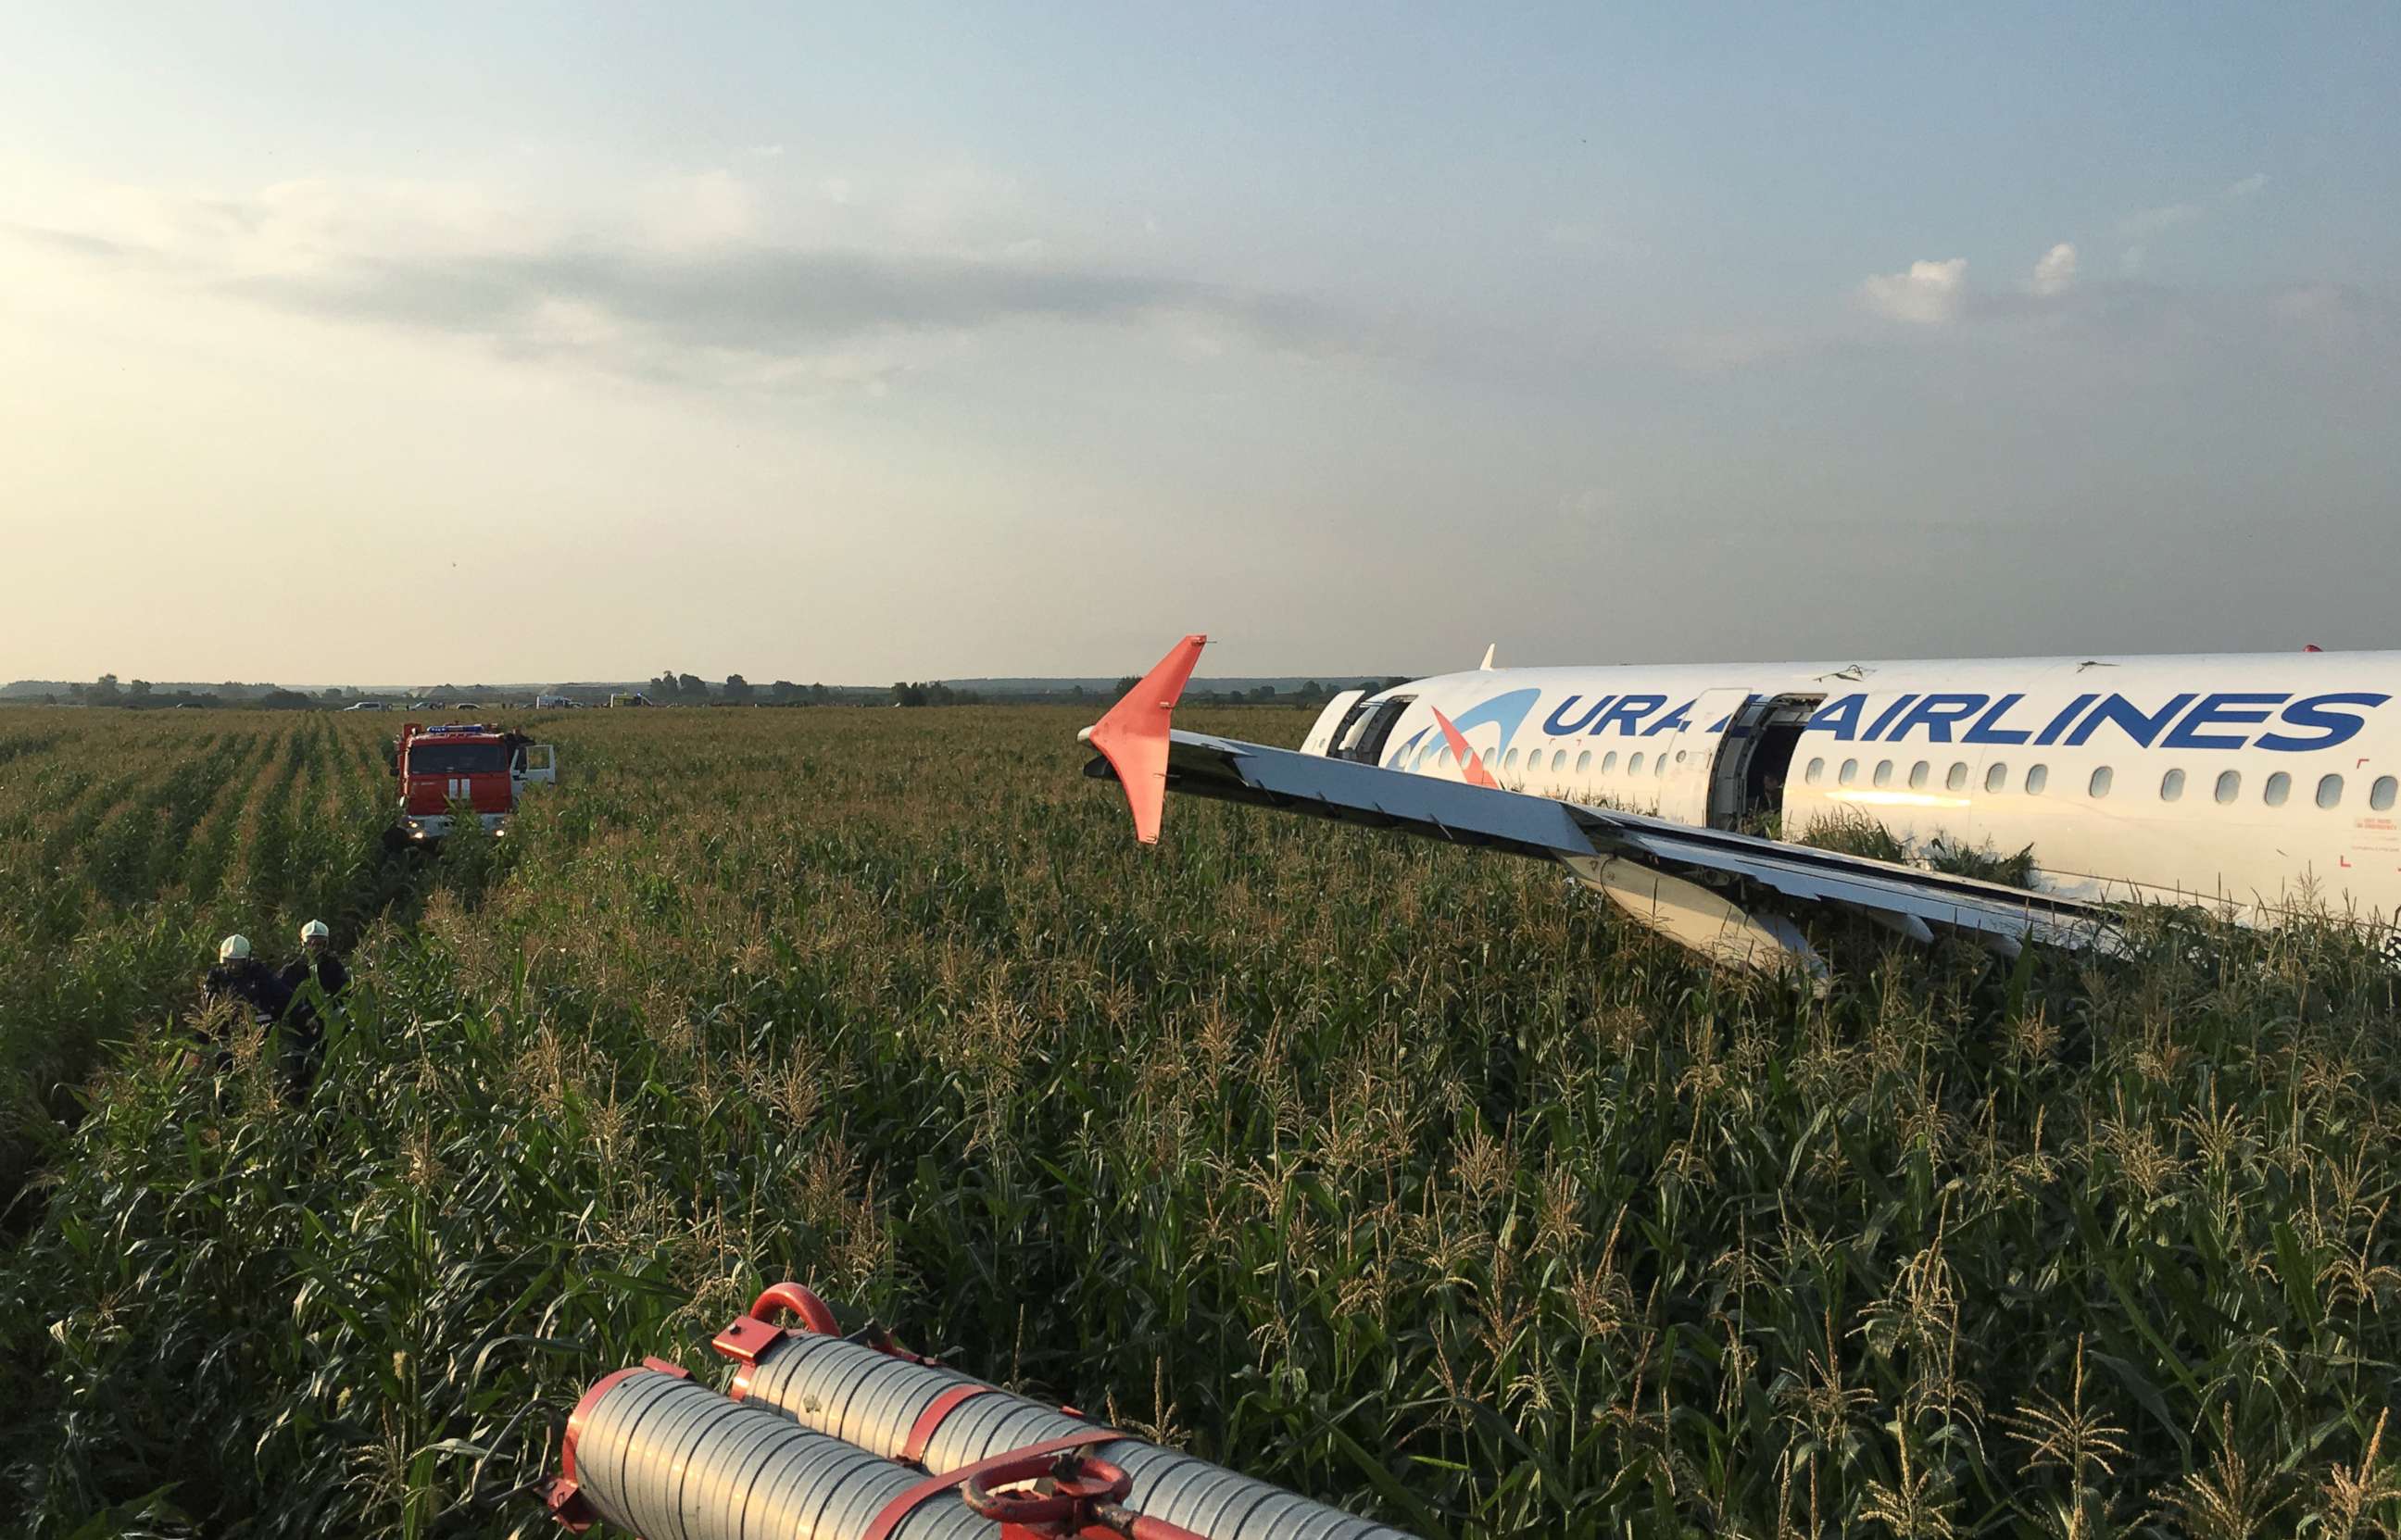 PHOTO: The Ural Airlines Airbus 321 passenger plane made an emergency landing in a field near Zhukovsky International Airport near Moscow on Aug. 15, 2019.